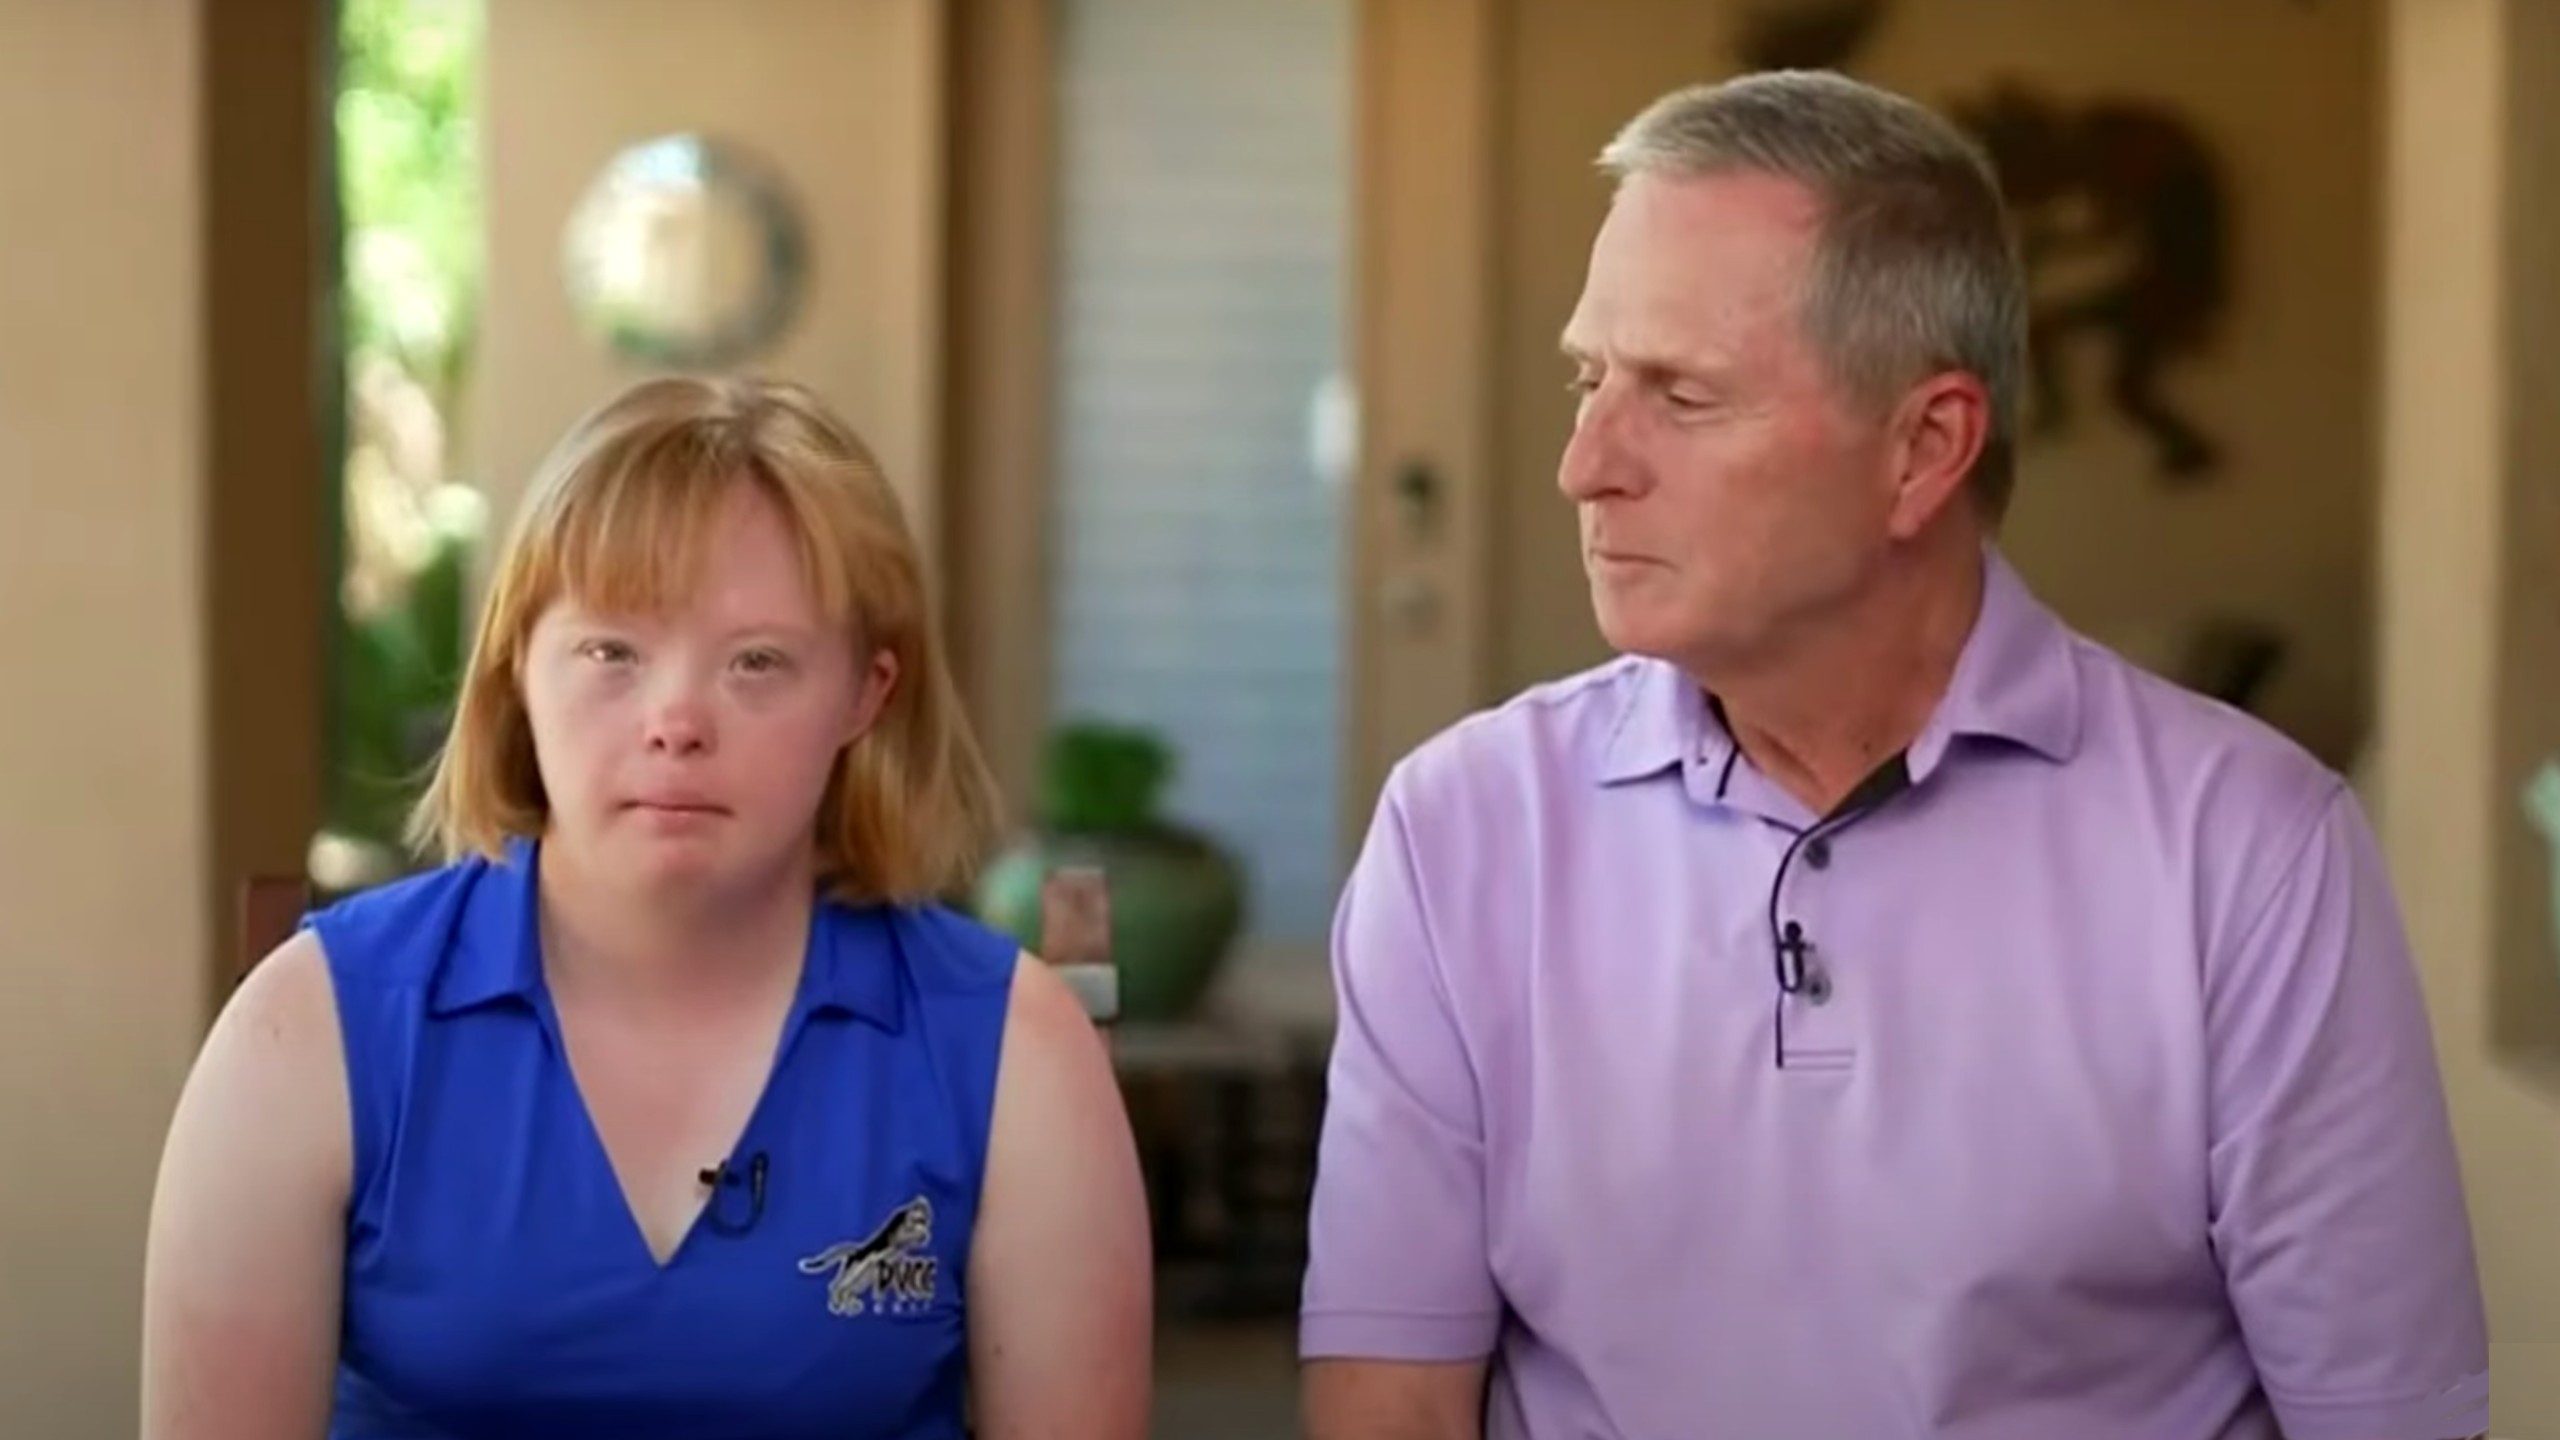 Amy Bockerstette Teaches Dad LessonGolfer with Down Syndrome Teaches Dad Lesson on Limitations